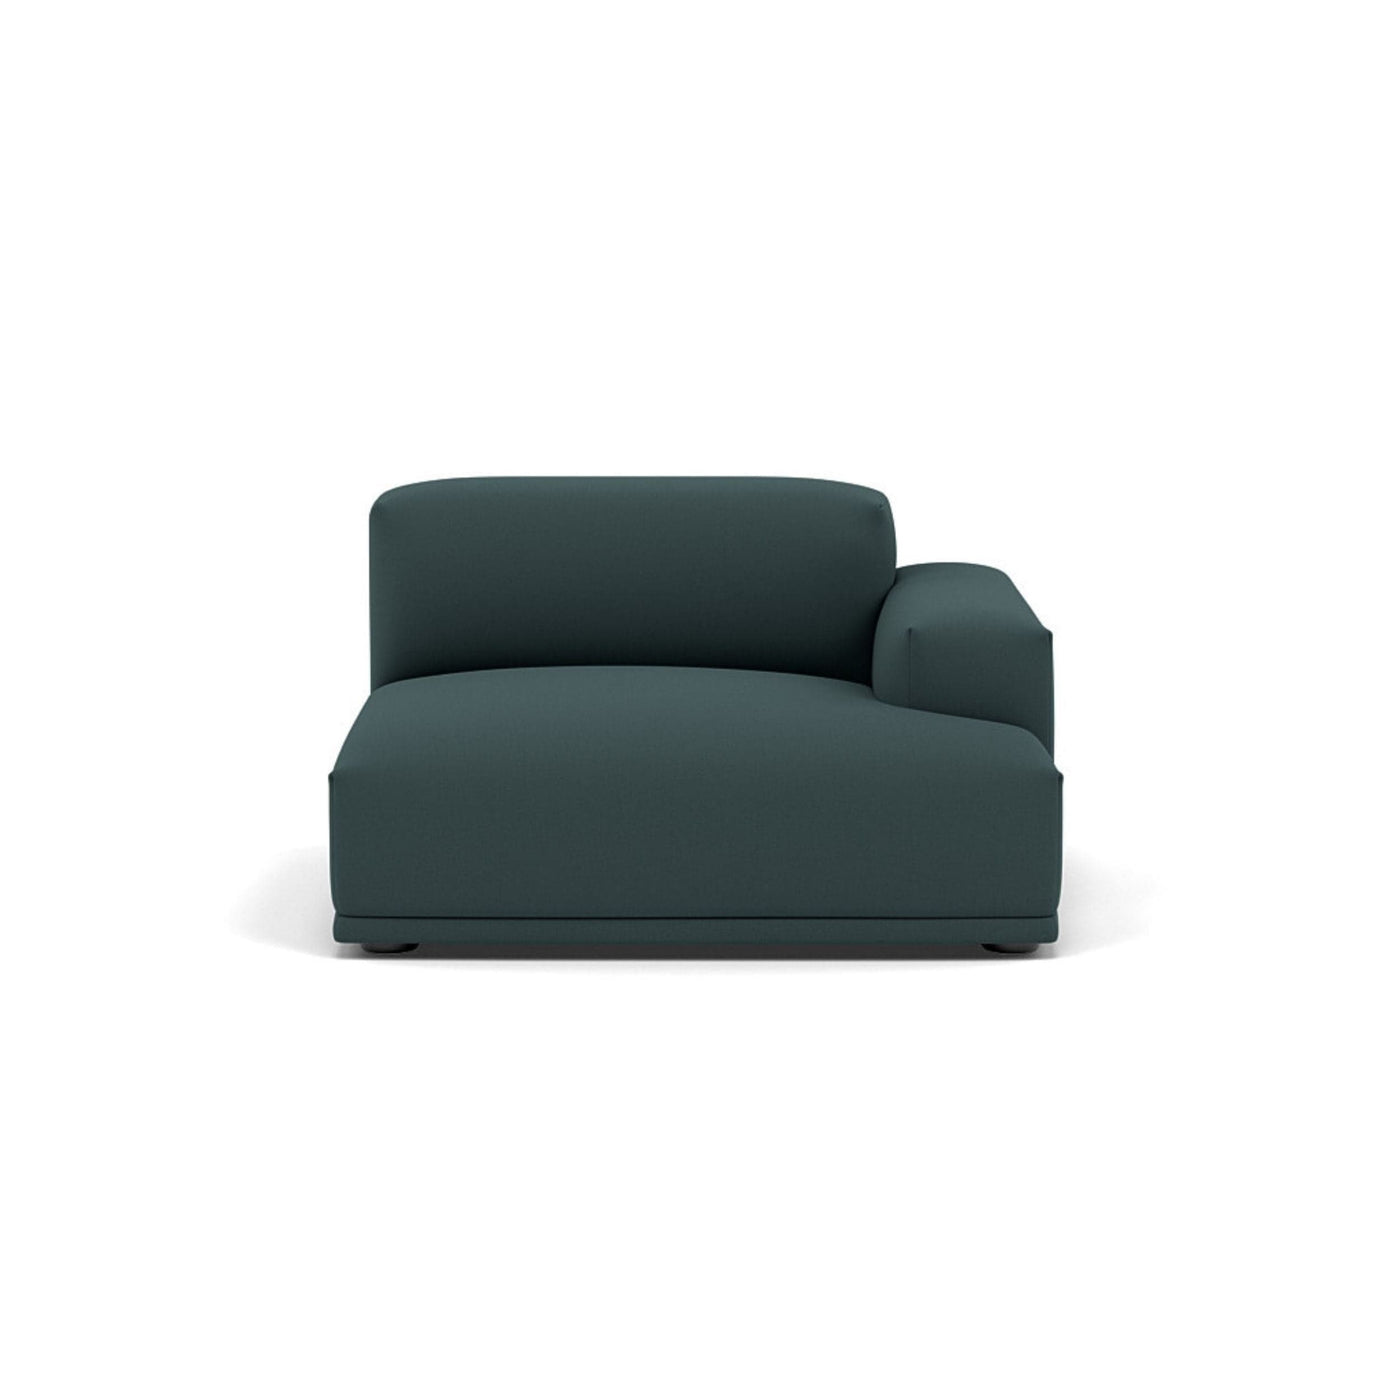 Muuto Connect Modular Sofa System, module b, right armrest, steelcut 180 green fabric. Available from someday designs. #colour_steelcut-180